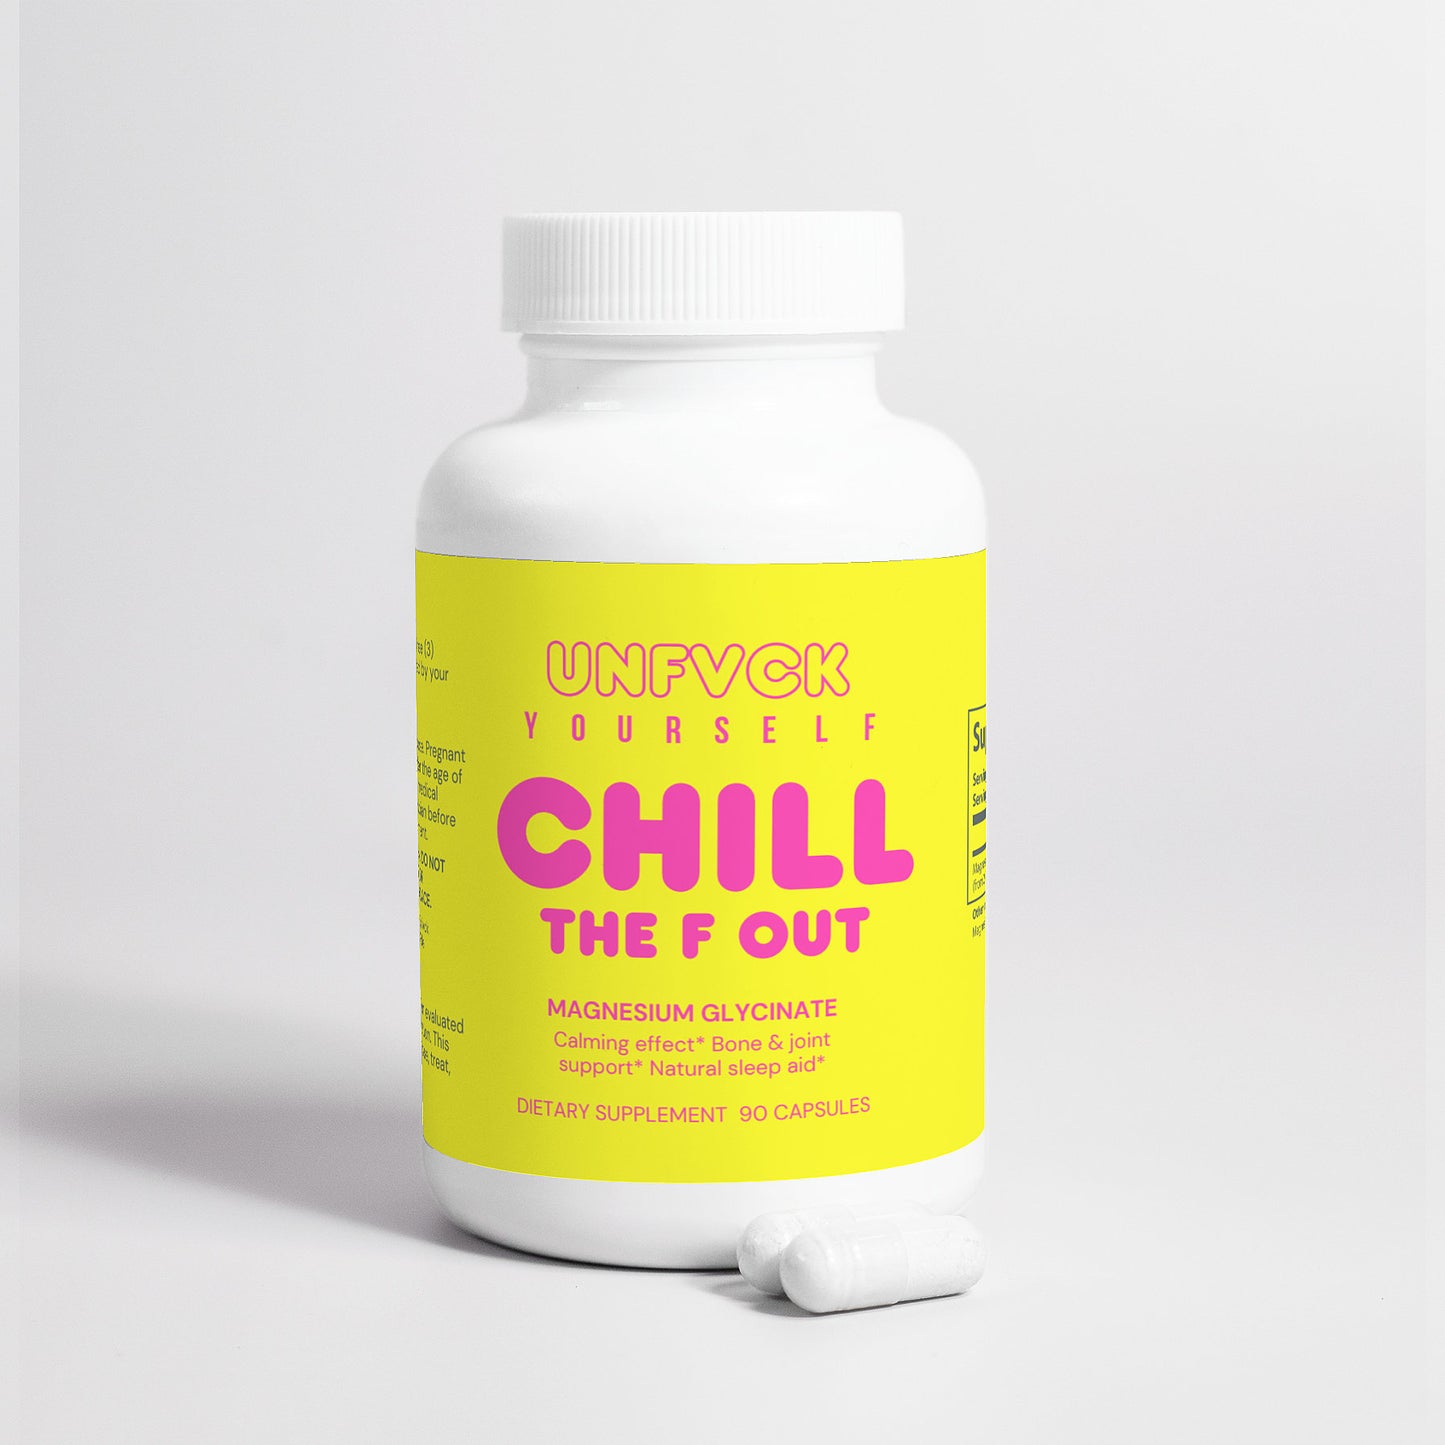 CHILL THE F OUT - Magnesium Glycinate